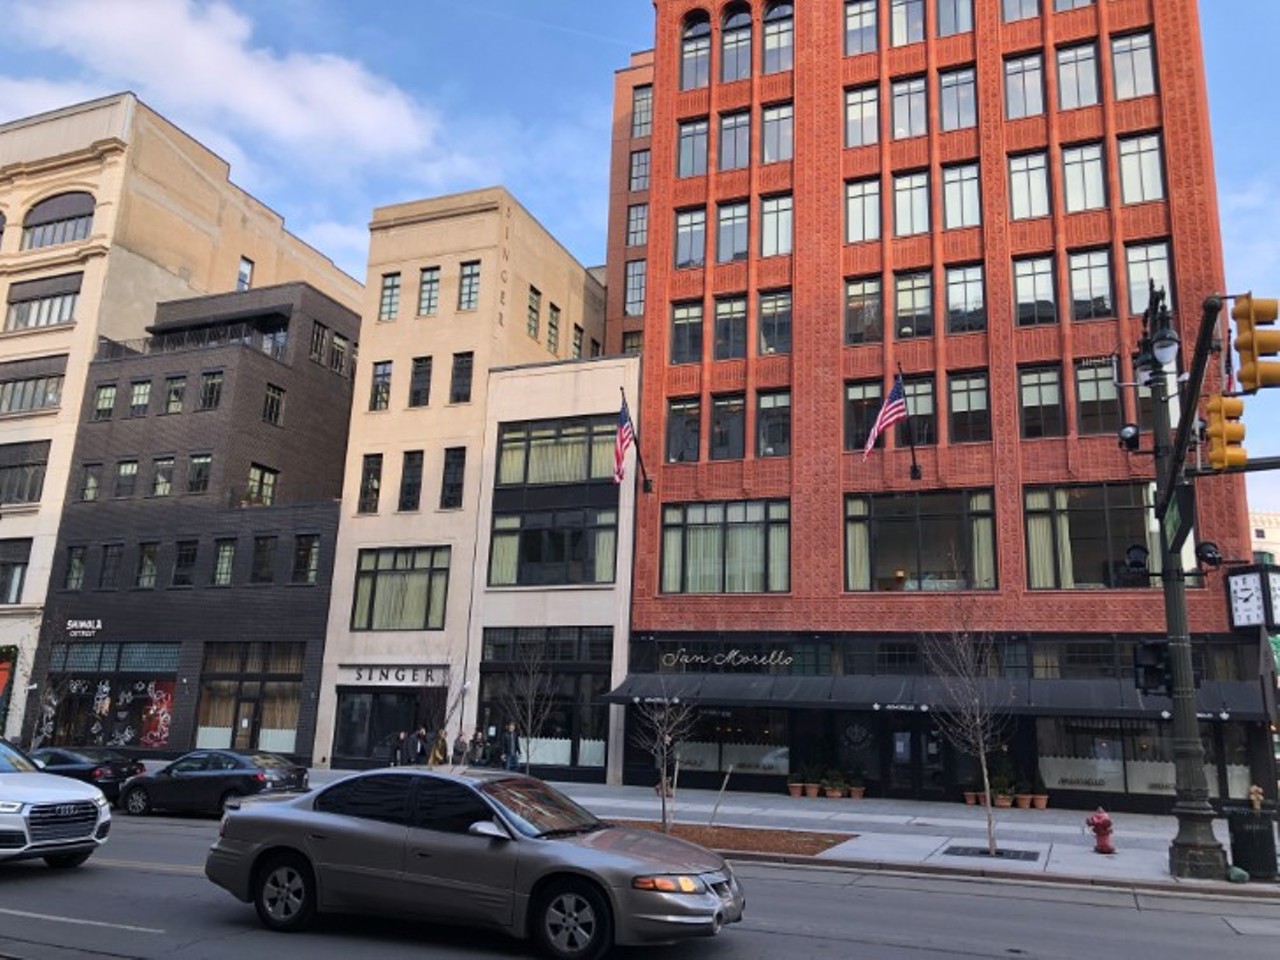 Shinola Hotel/San Morello
1400 Woodward Ave., Detroit
Another one that was mentioned when it comes to the nicest bathrooms is the Shinola Hotel. “That Shinola bathroom is plush af,” Redditor downriverrat3 said. “Plush, smells great, and is rarely busy,” added AarunFast.